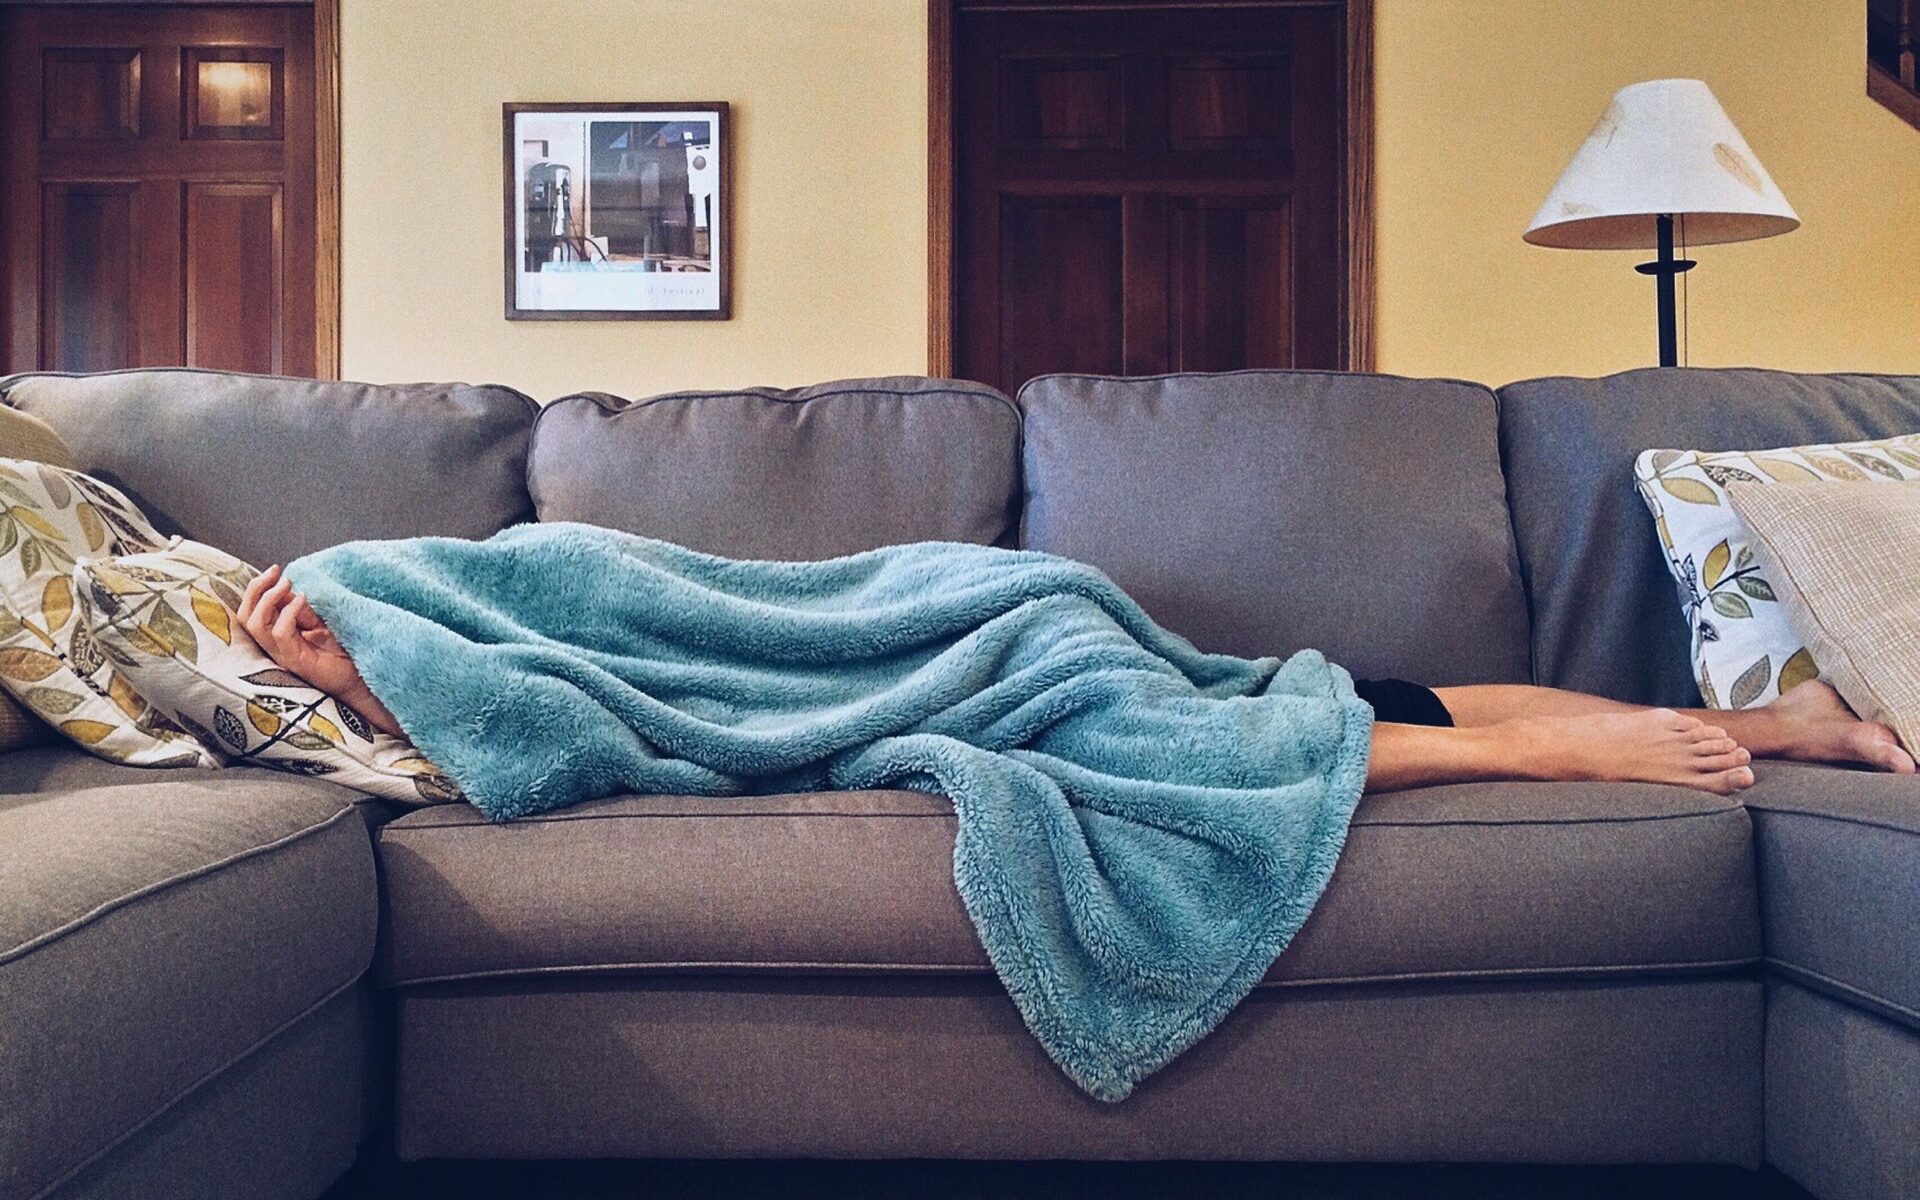 Person Sick on Couch